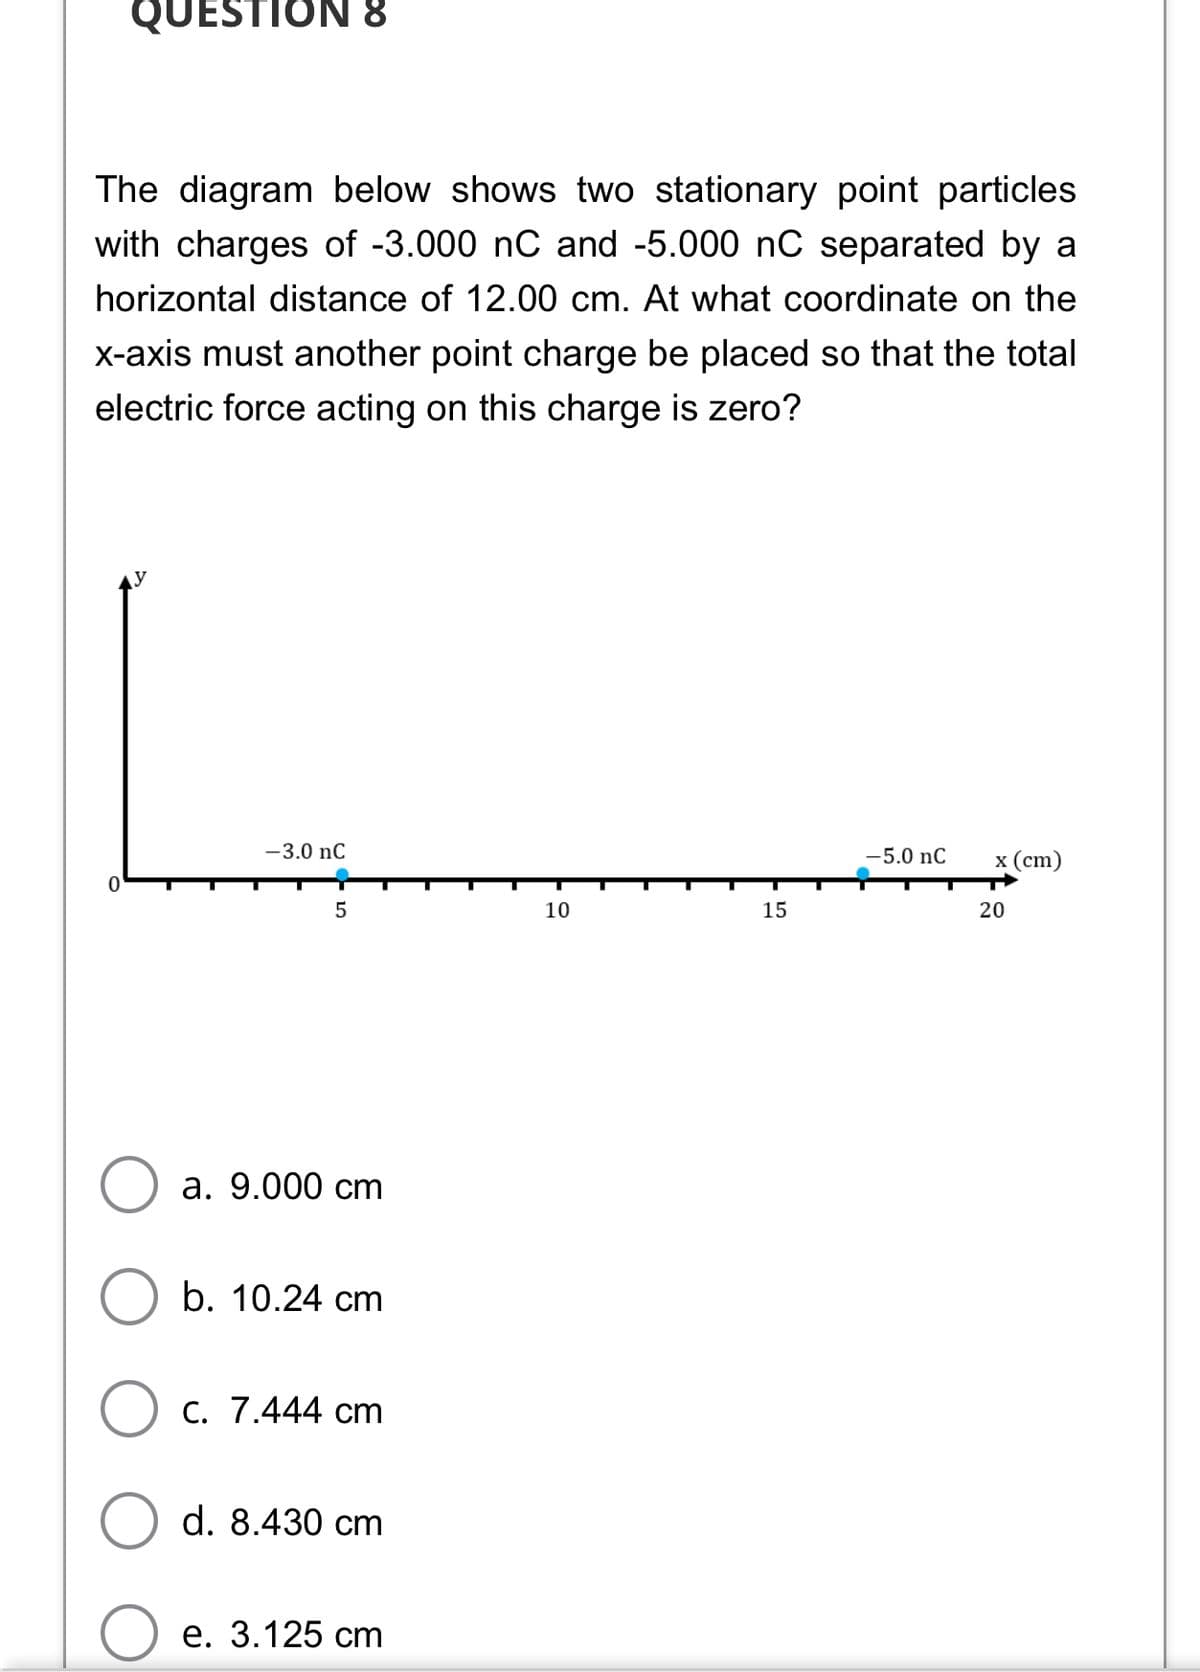 QUESTION 8
The diagram below shows two stationary point particles
with charges of -3.000 nC and -5.000 nC separated by a
horizontal distance of 12.00 cm. At what coordinate on the
x-axis must another point charge be placed so that the total
electric force acting on this charge is zero?
-3.0 nC
-5.0 nC
х (ст)
10
15
а. 9.000 cm
b. 10.24 cm
C. 7.444 cm
d. 8.430 cm
е. 3.125 сm
20
